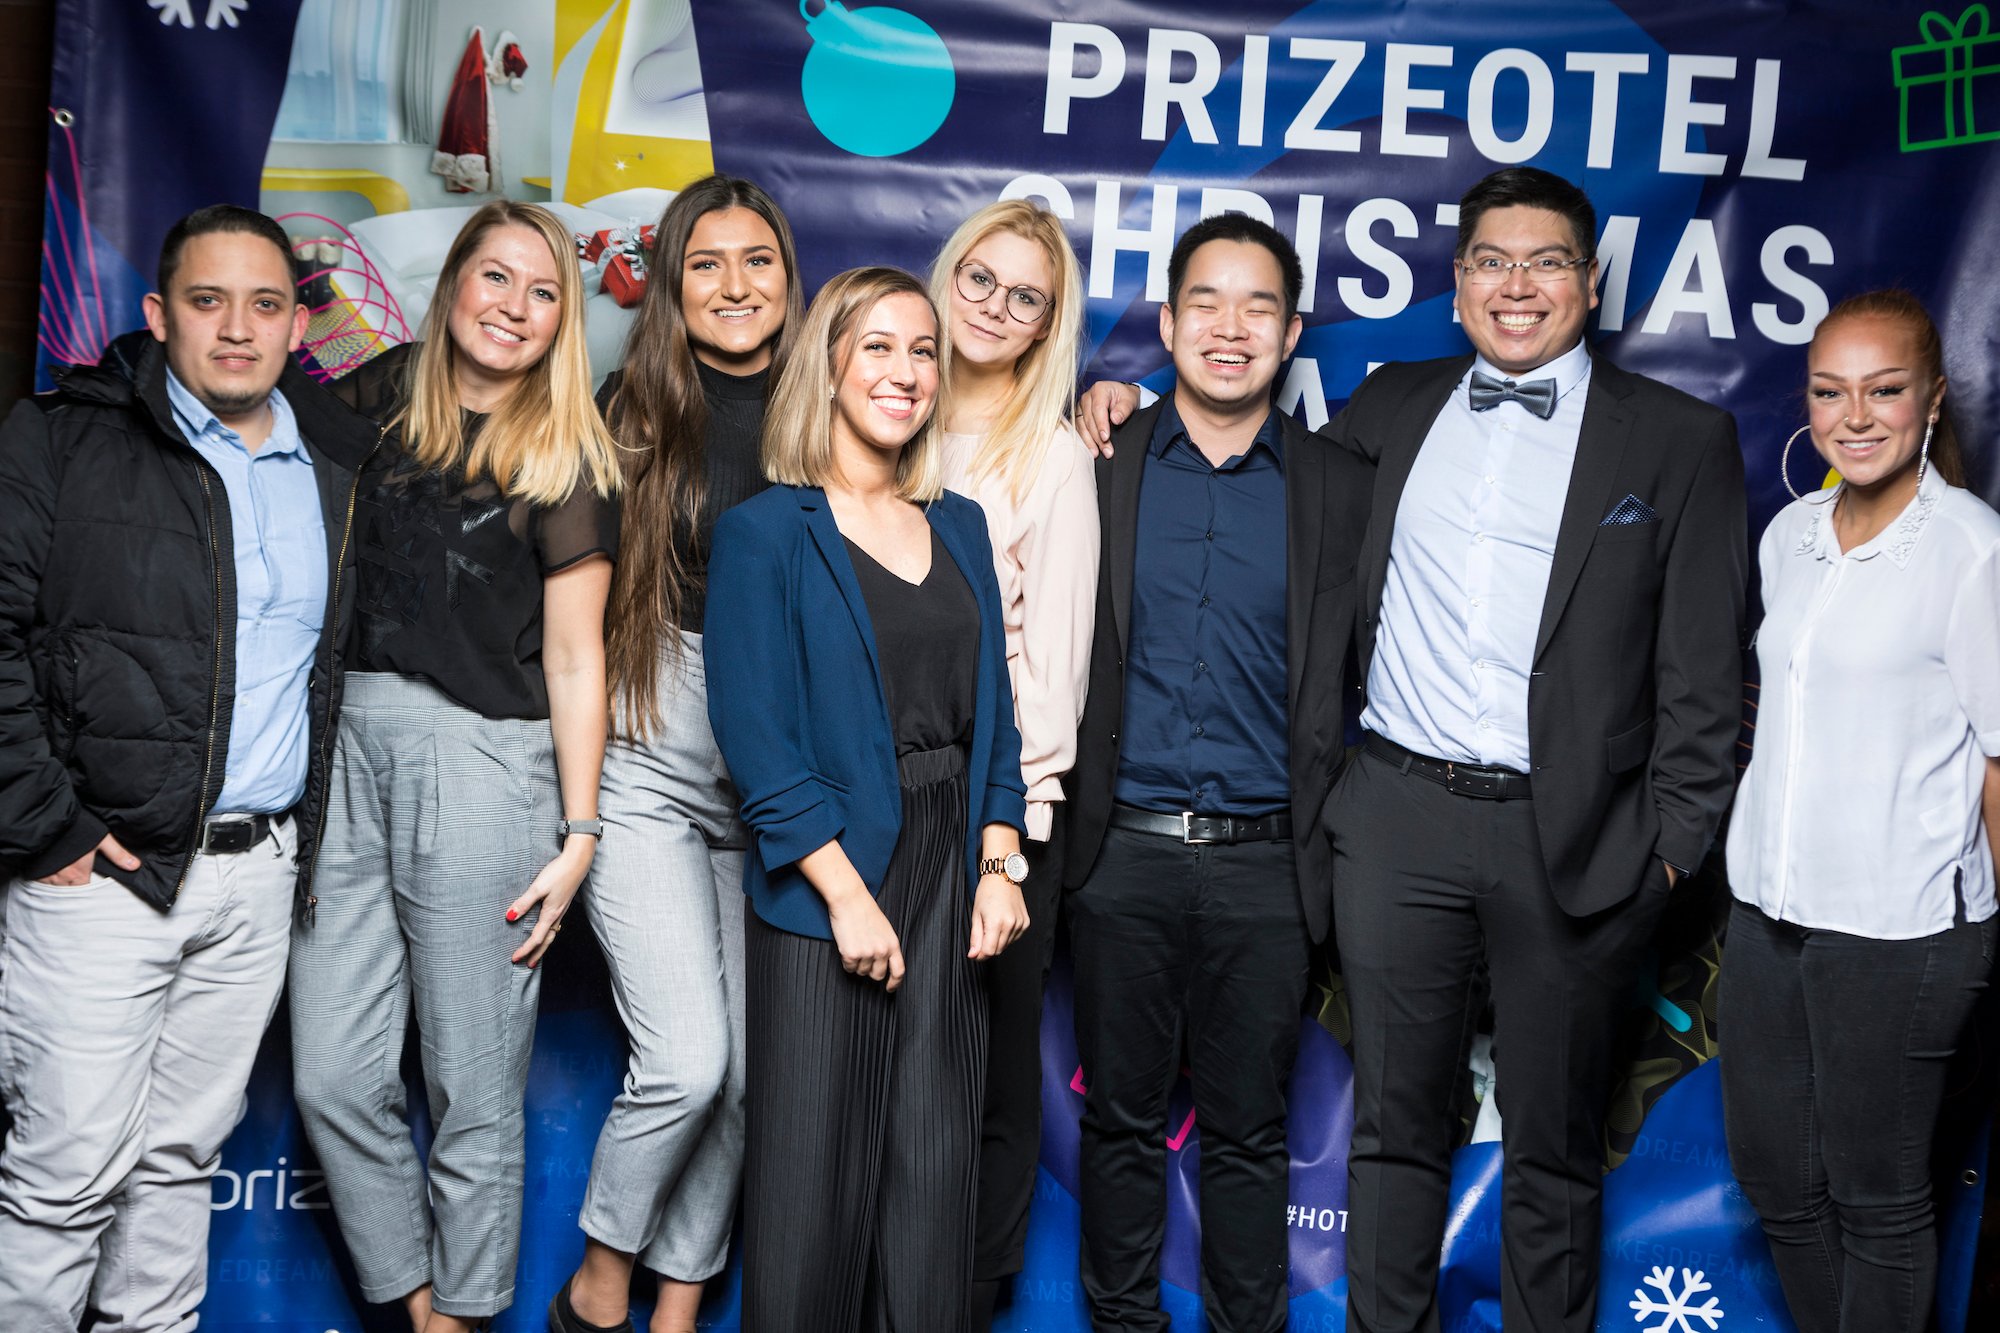 The young team of prizeotel employees is standing in front of a prizeotel poster and smiling